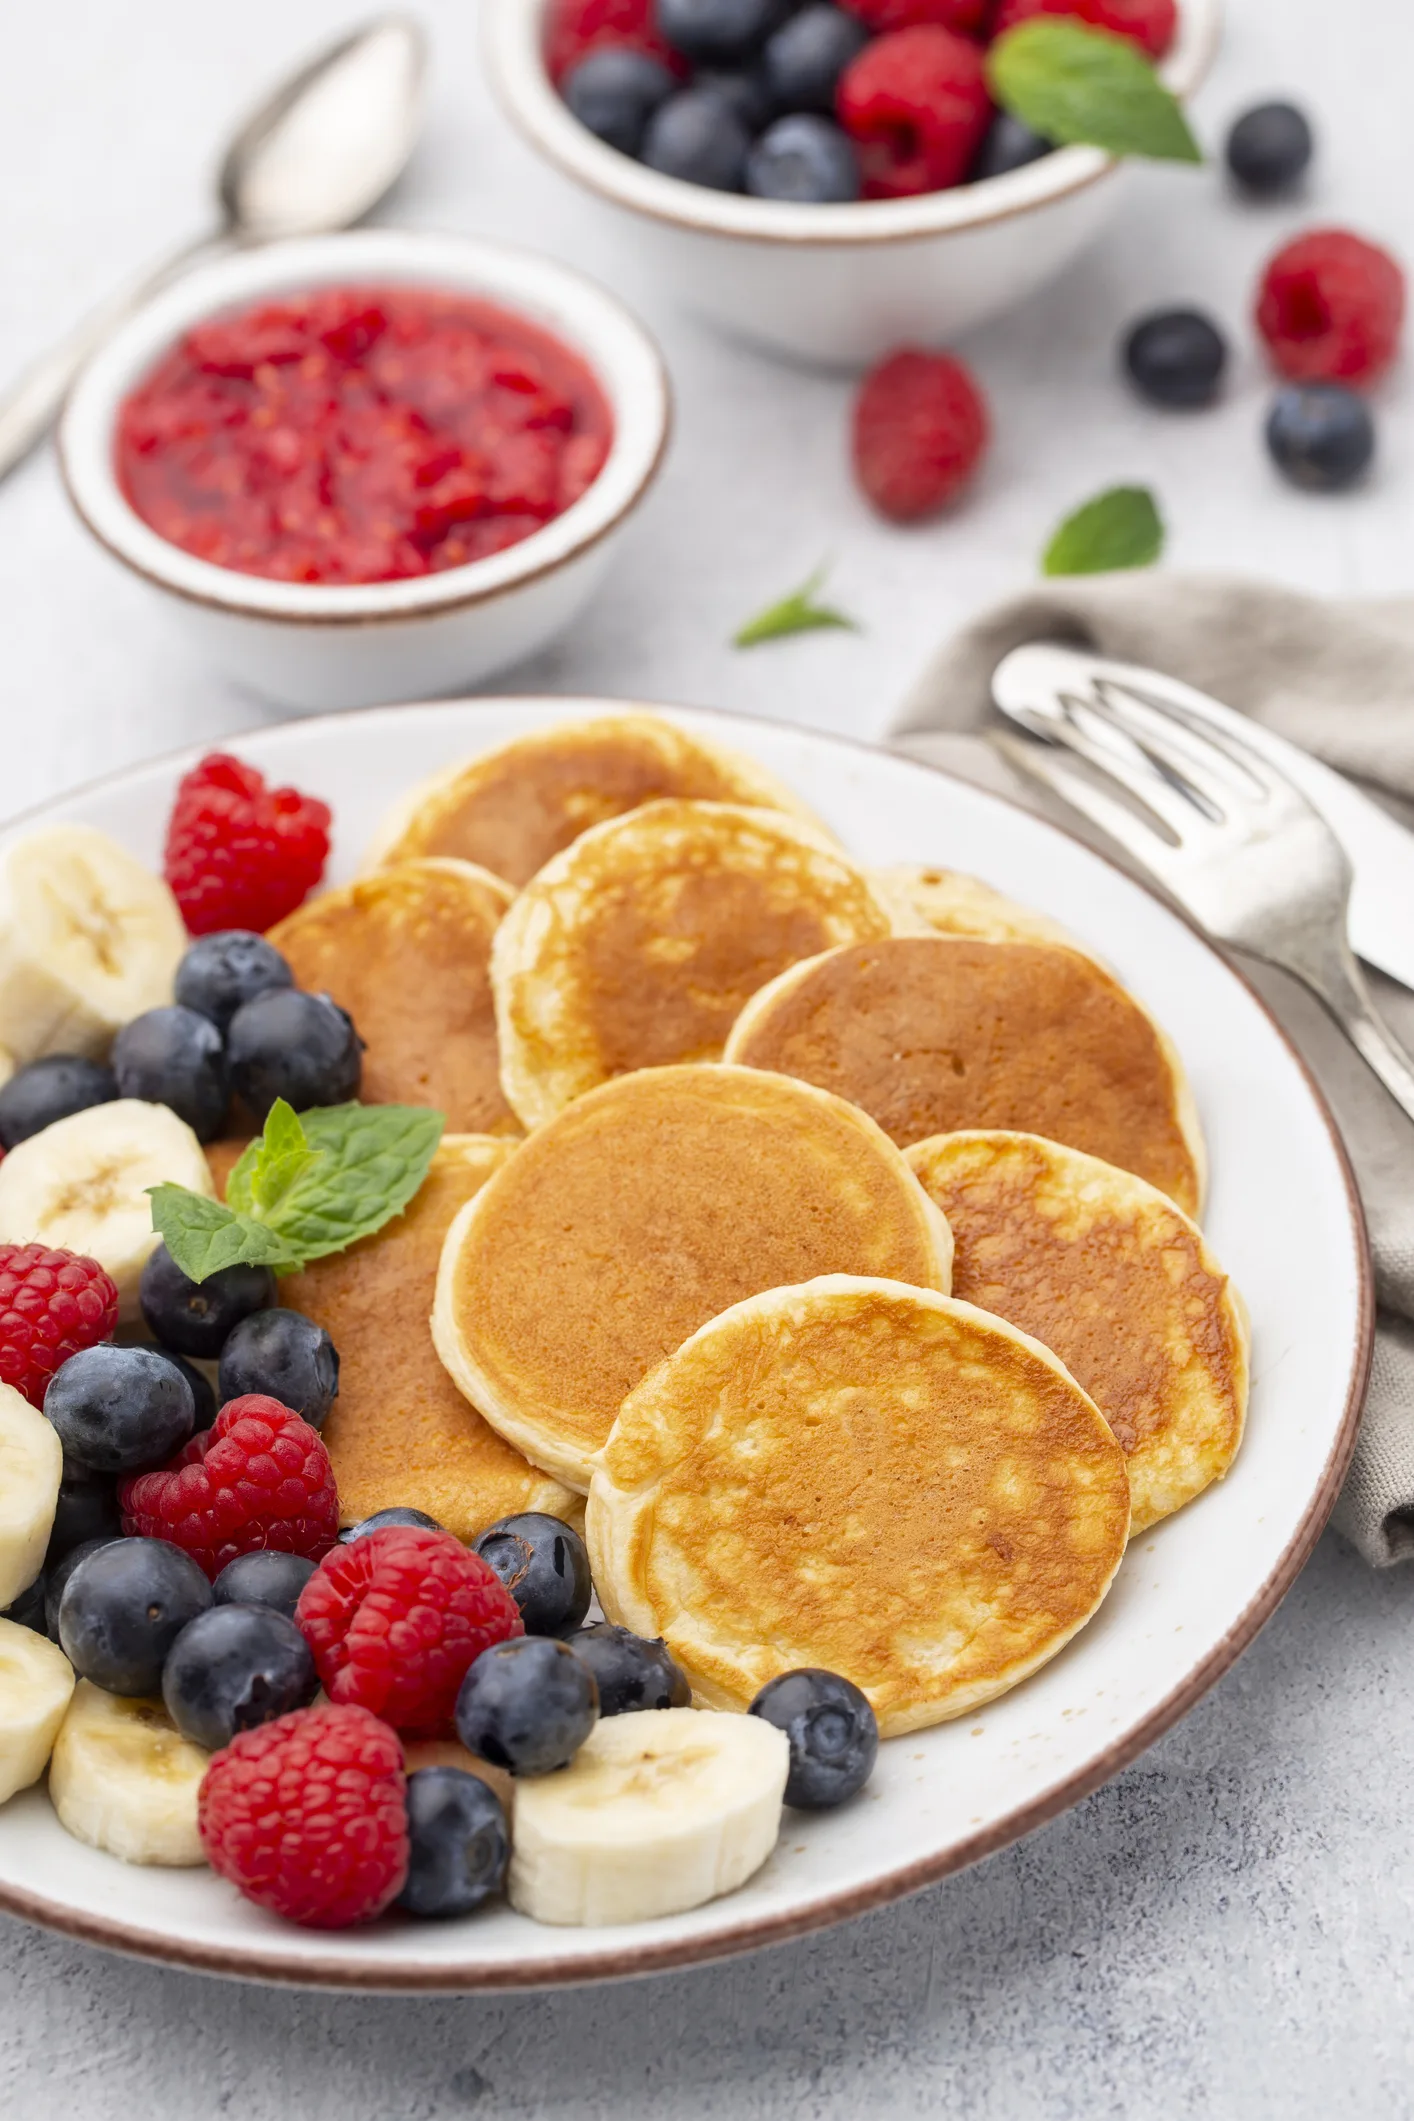 Try this gluten-free pancake recipe this Shorve Tuesday